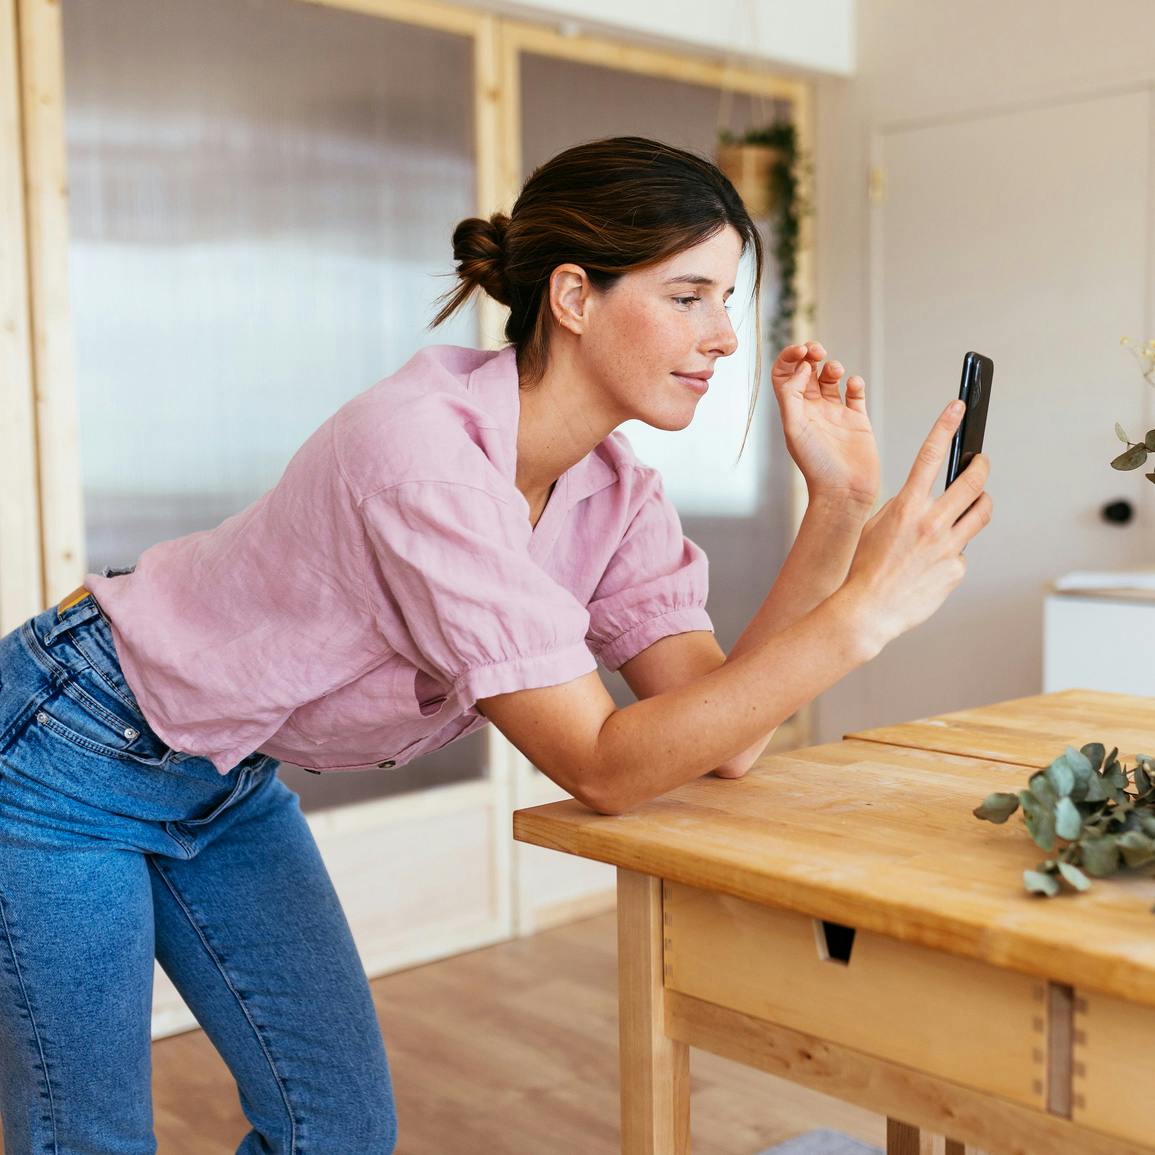 Young woman wearing a pink shirt, leaning over a kitchen island, looking and smiling slightly at her phone